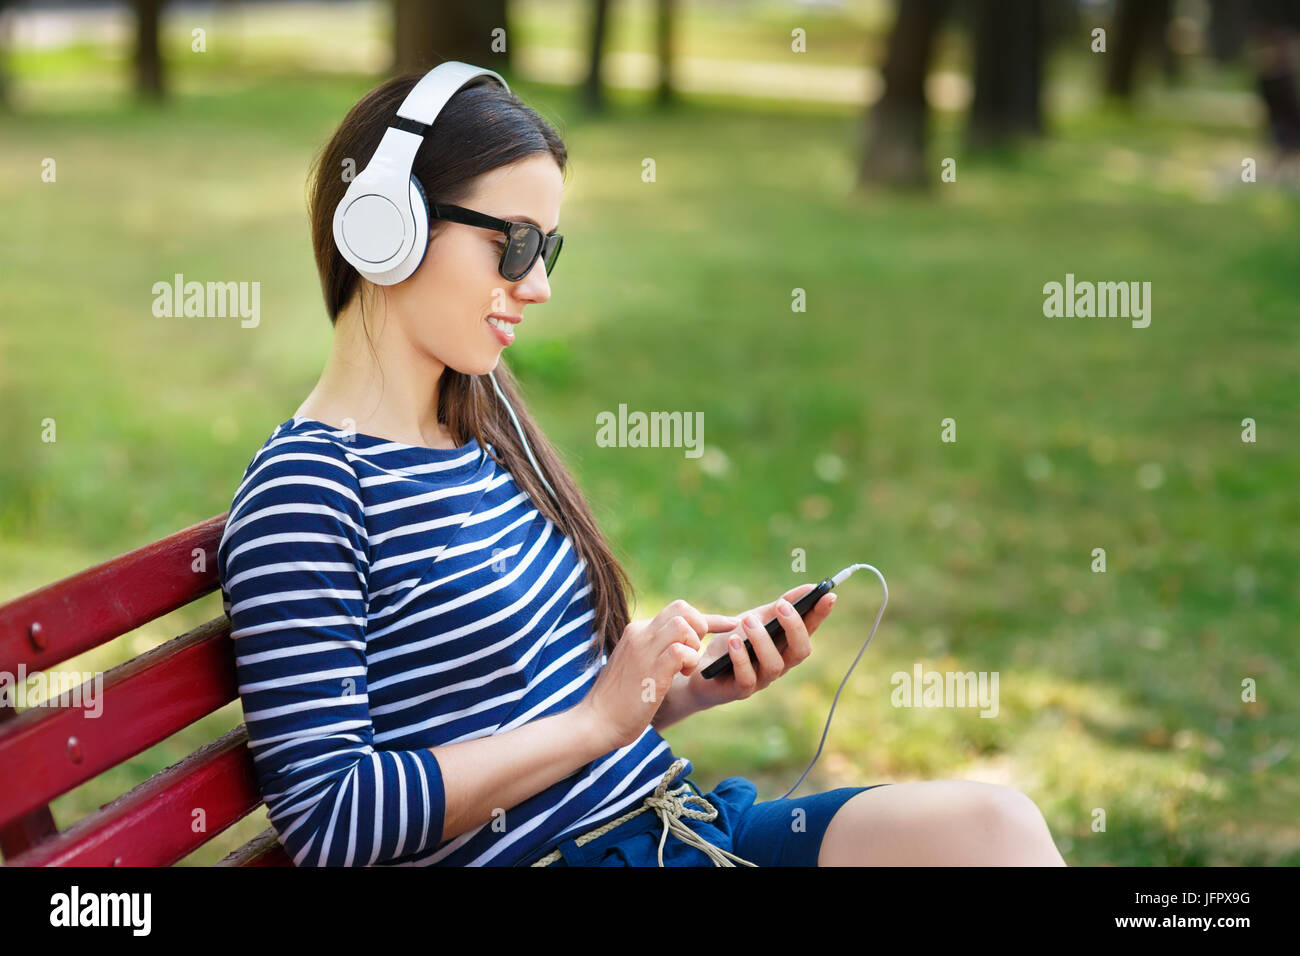 Young woman with headphones and smartphone outdoors on summer day. Girl listening music in headphones in park Stock Photo